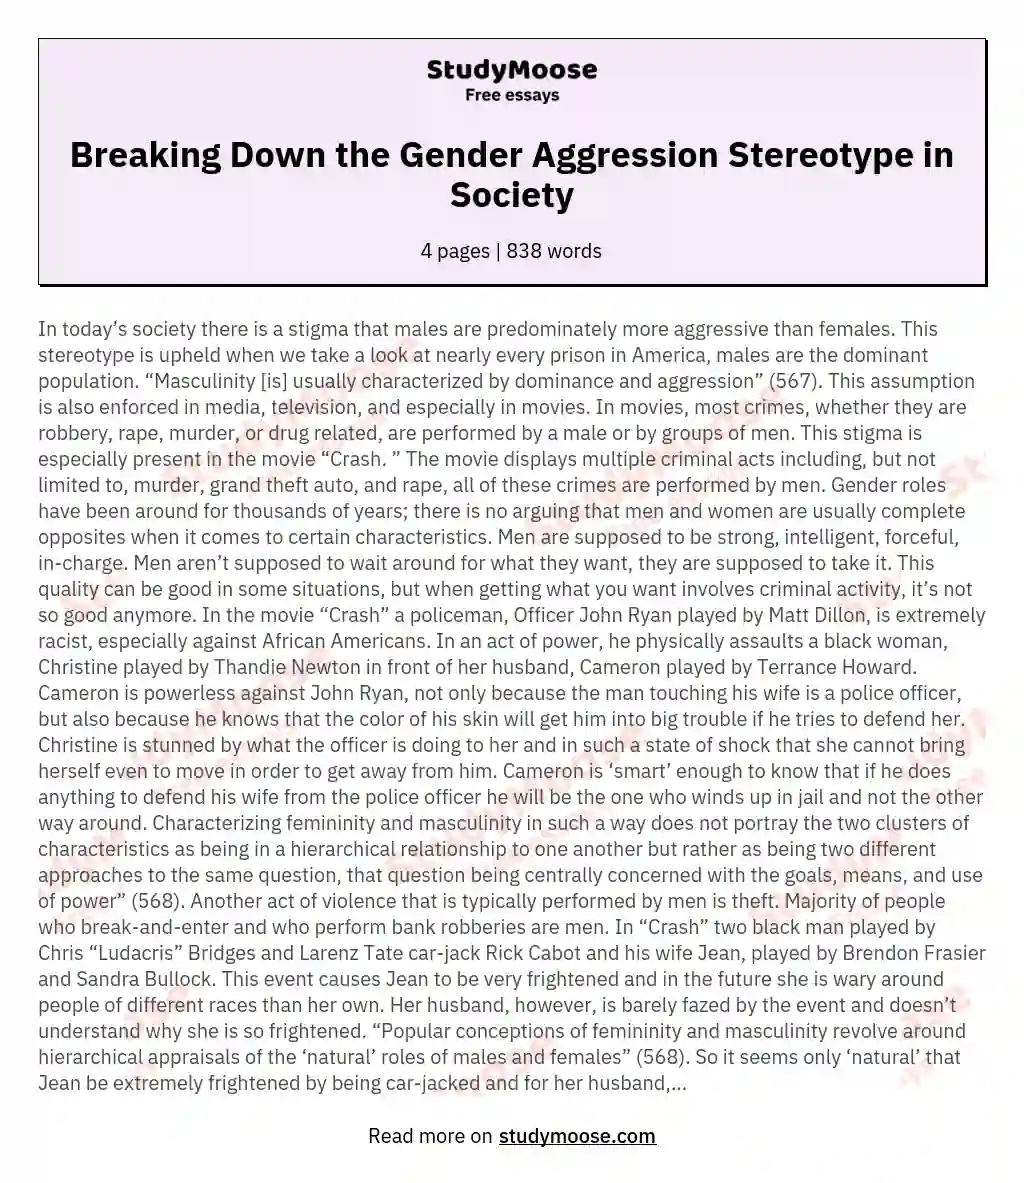 Breaking Down the Gender Aggression Stereotype in Society